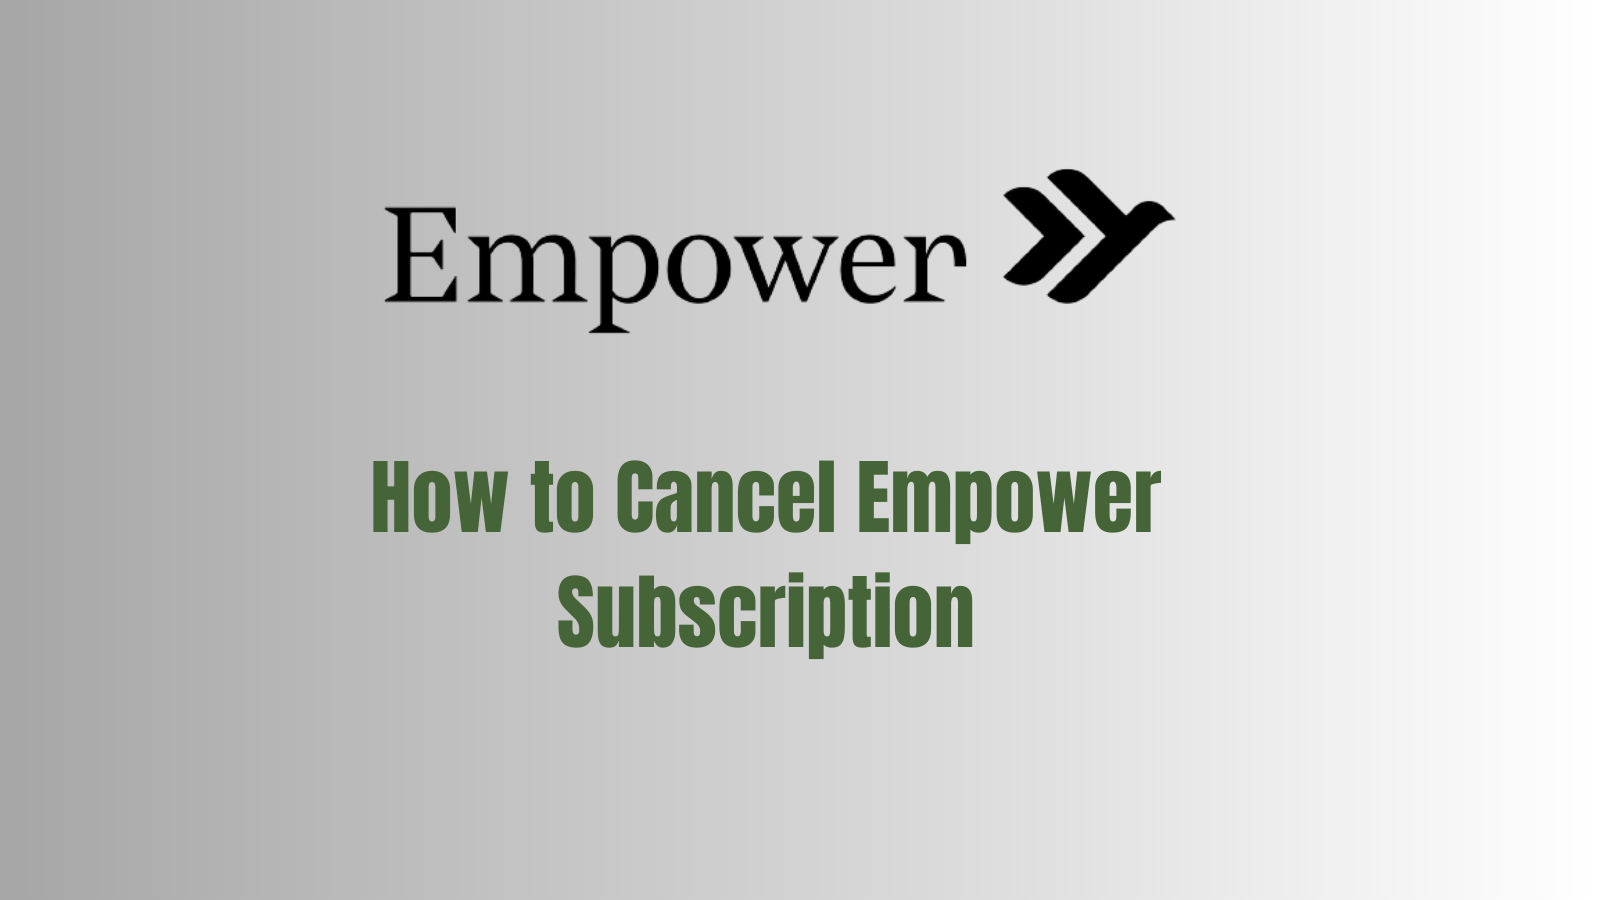 How to Cancel Empower Subscription